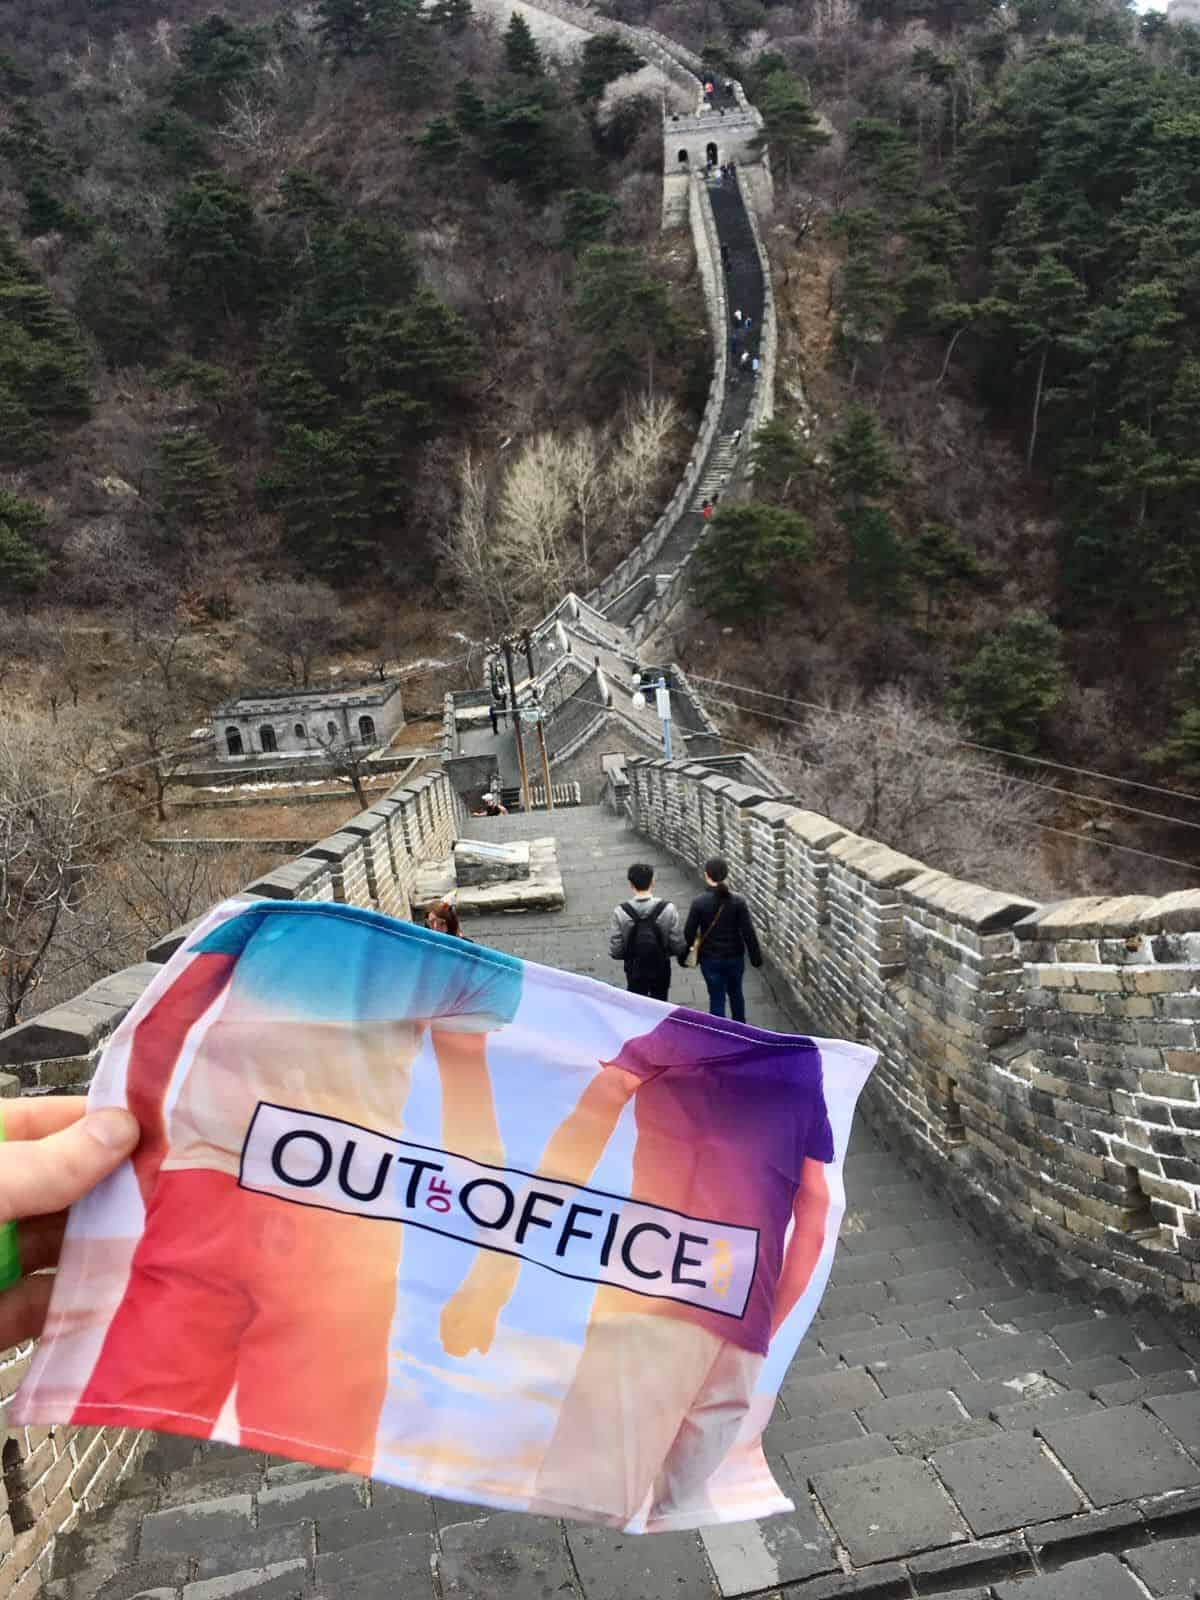 Day 3: The Great Wall of China